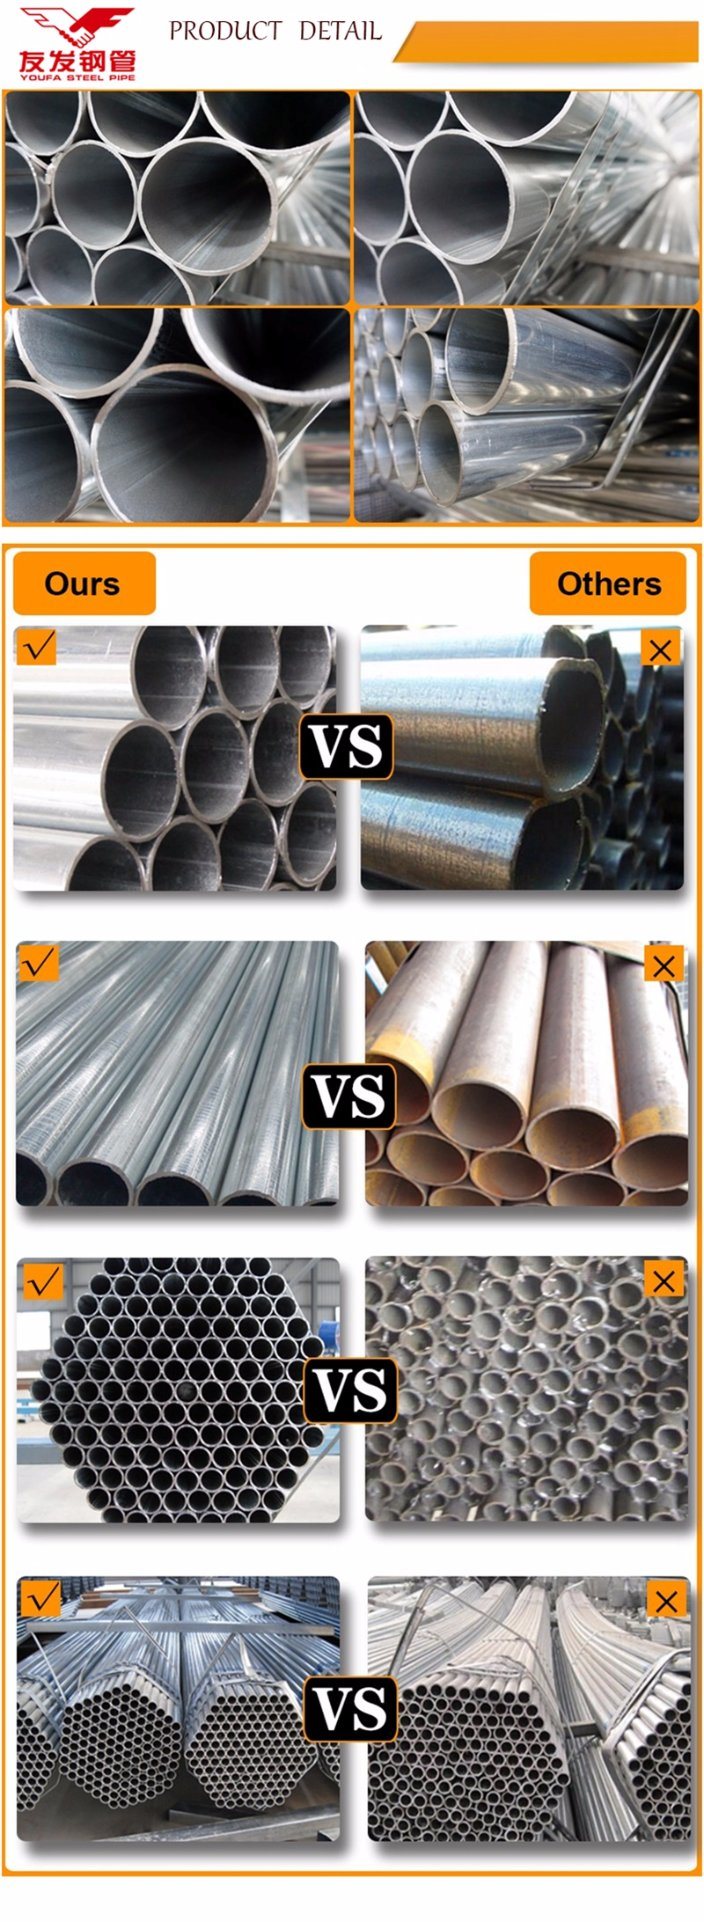 China Supplier UL Listed EMT Conduit Sch40 Galvanized Steel Pipe